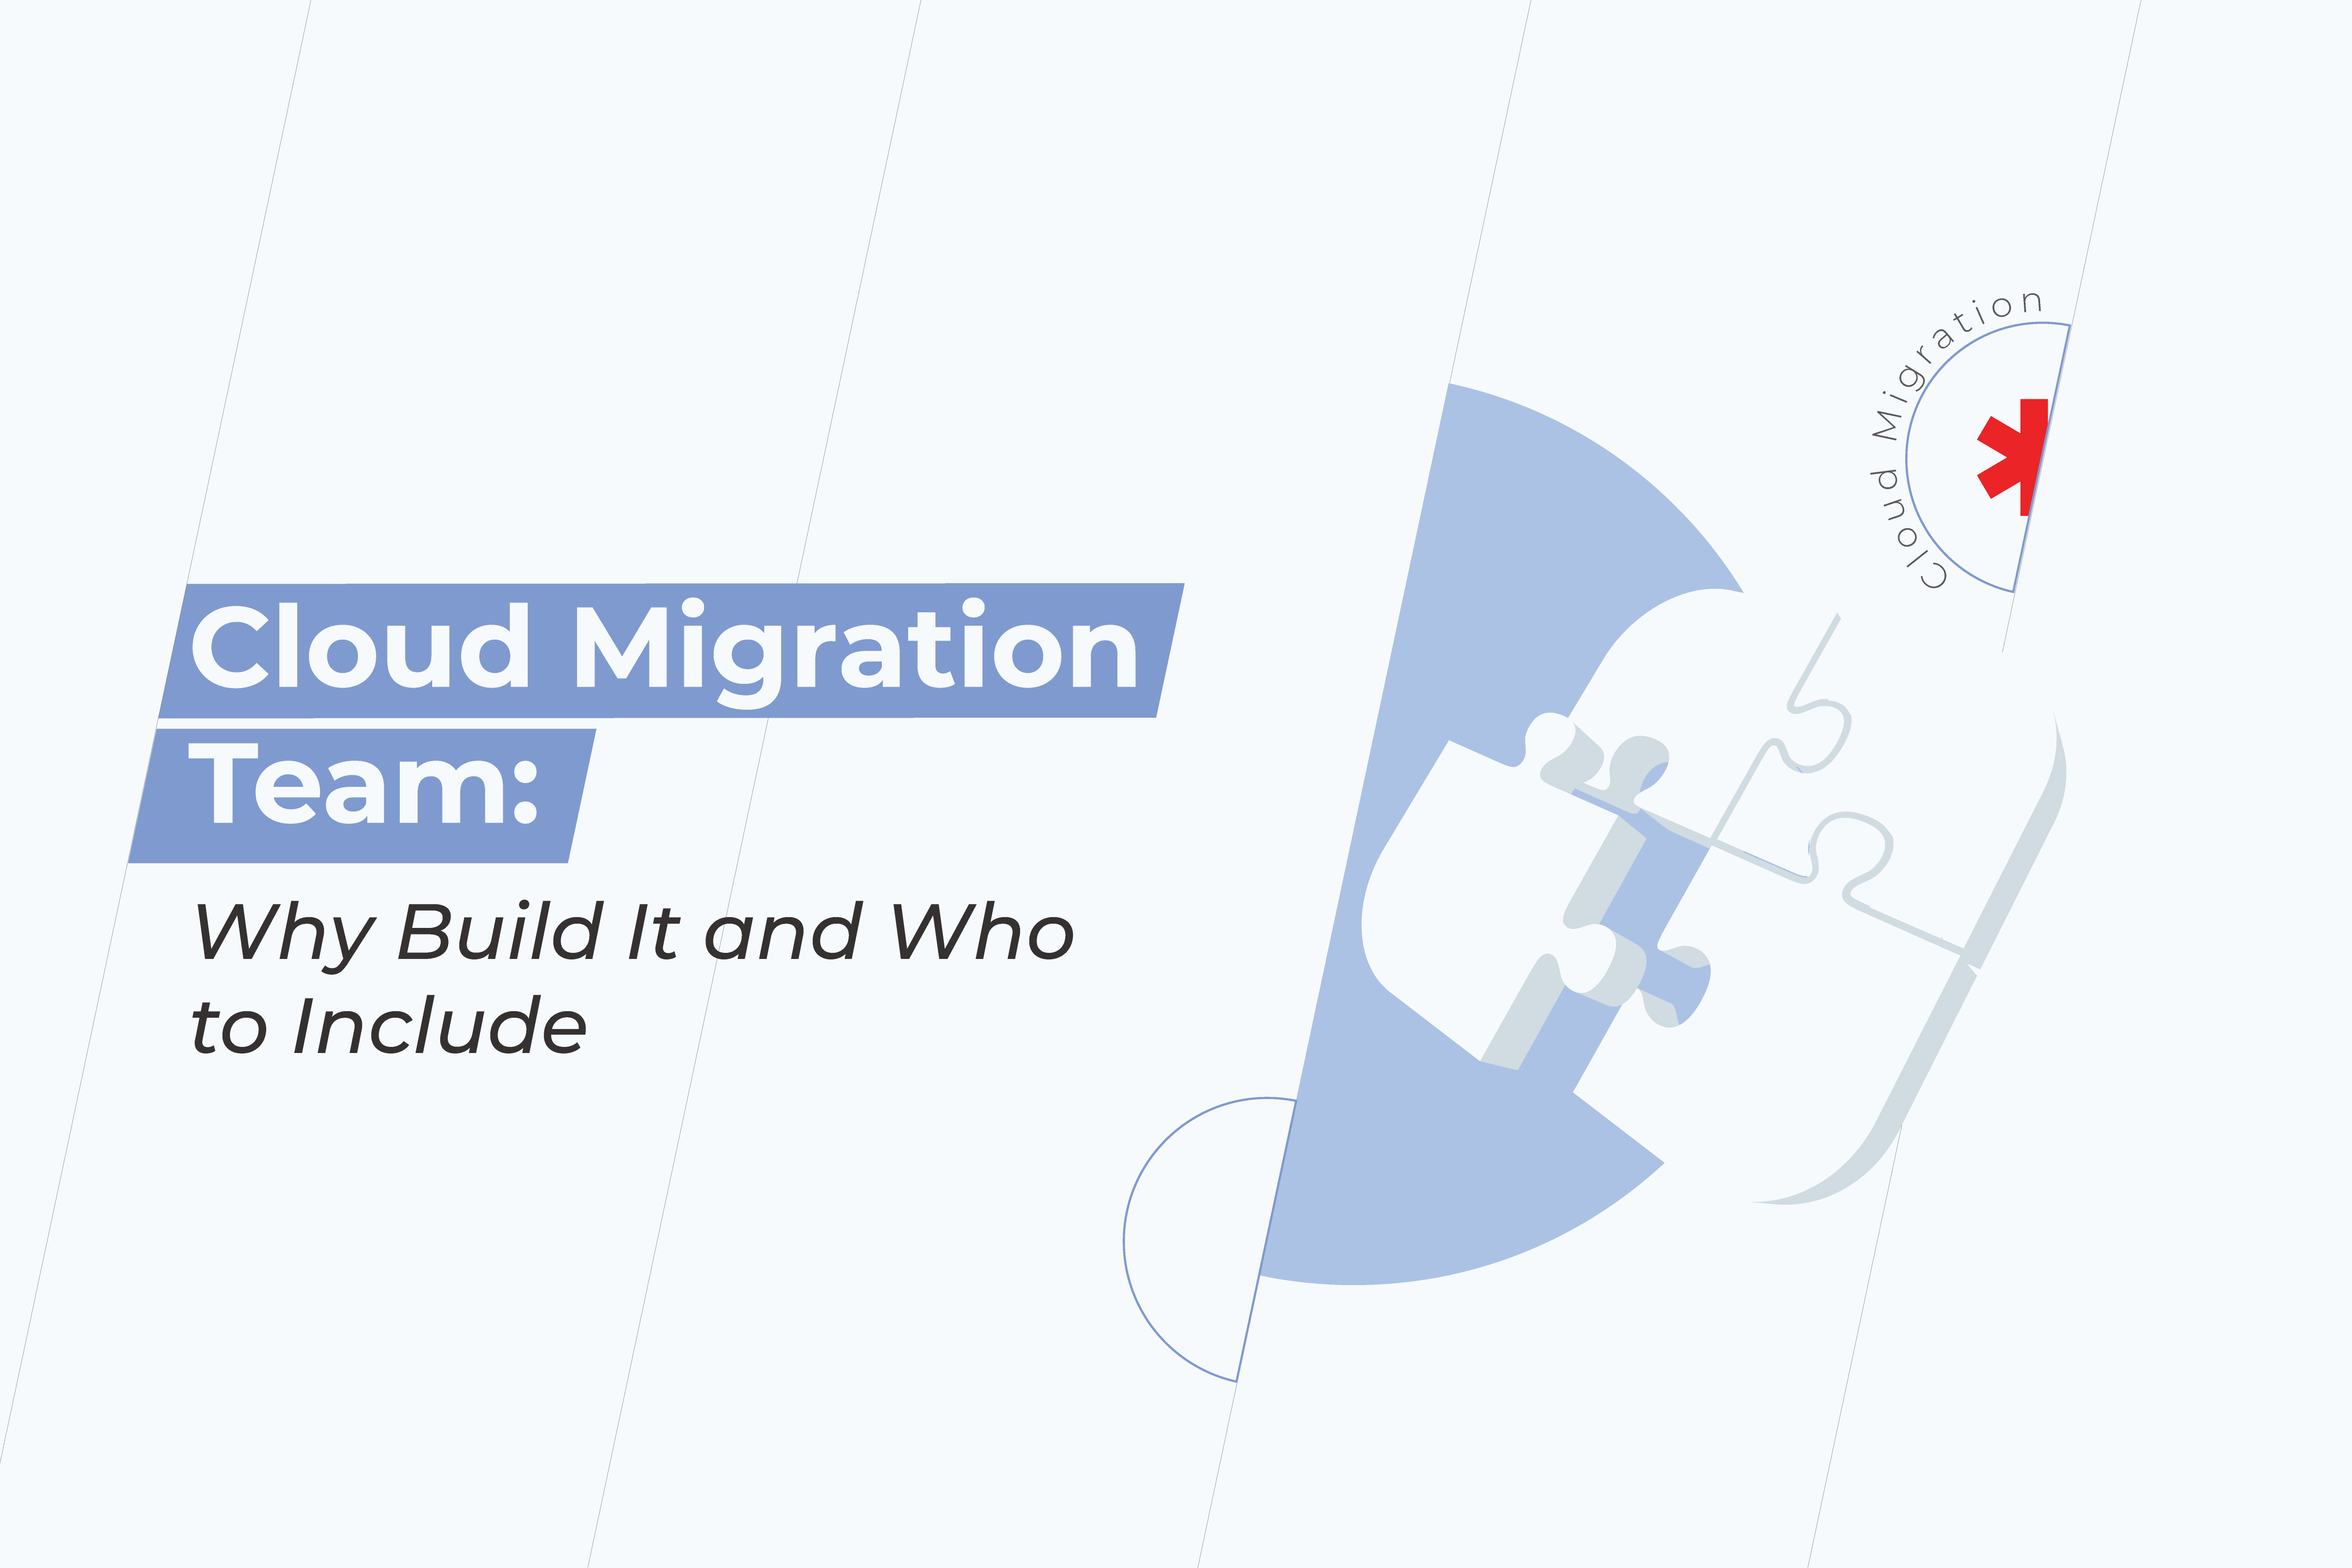 Cloud Migration Team: Why Build It and Whom to Include